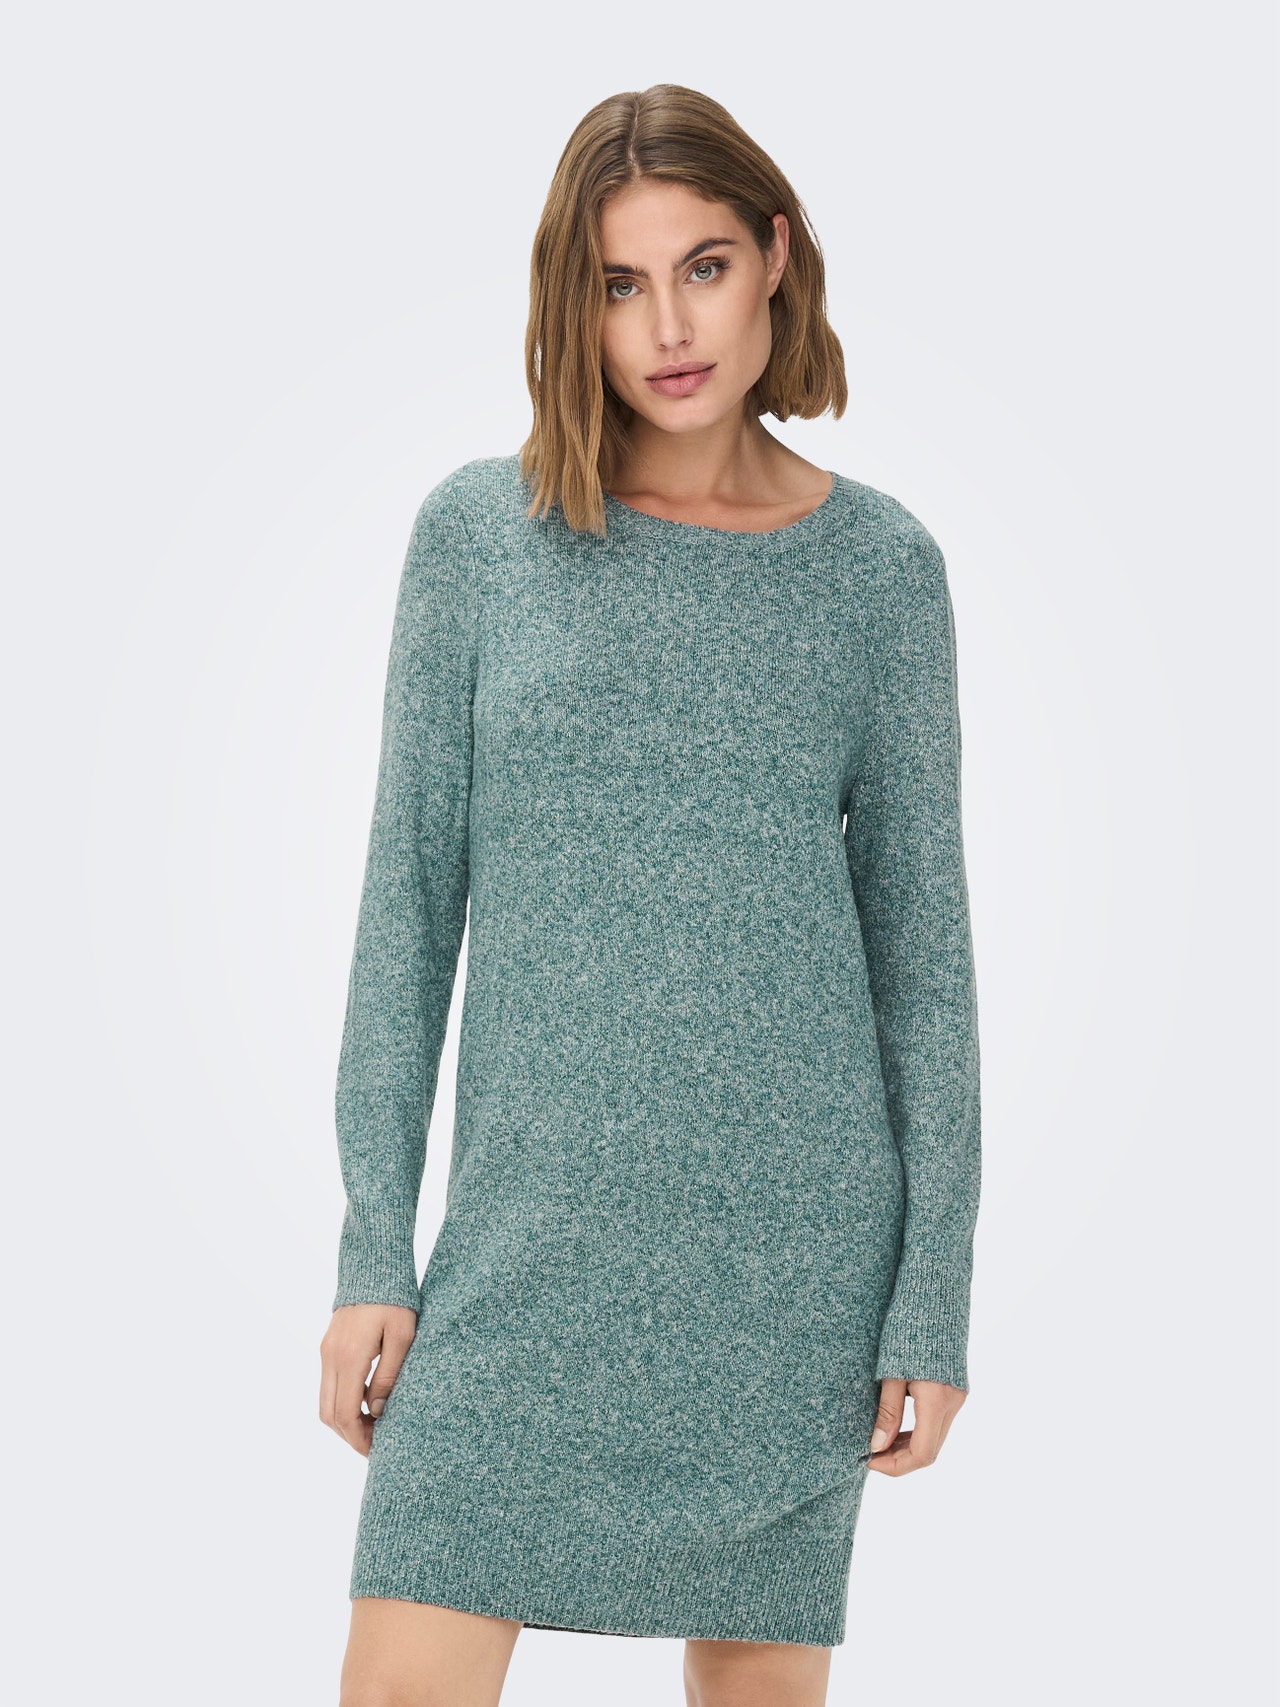 ONLY Relaxed Fit Round Neck Short dress -Sea Moss - 15275248